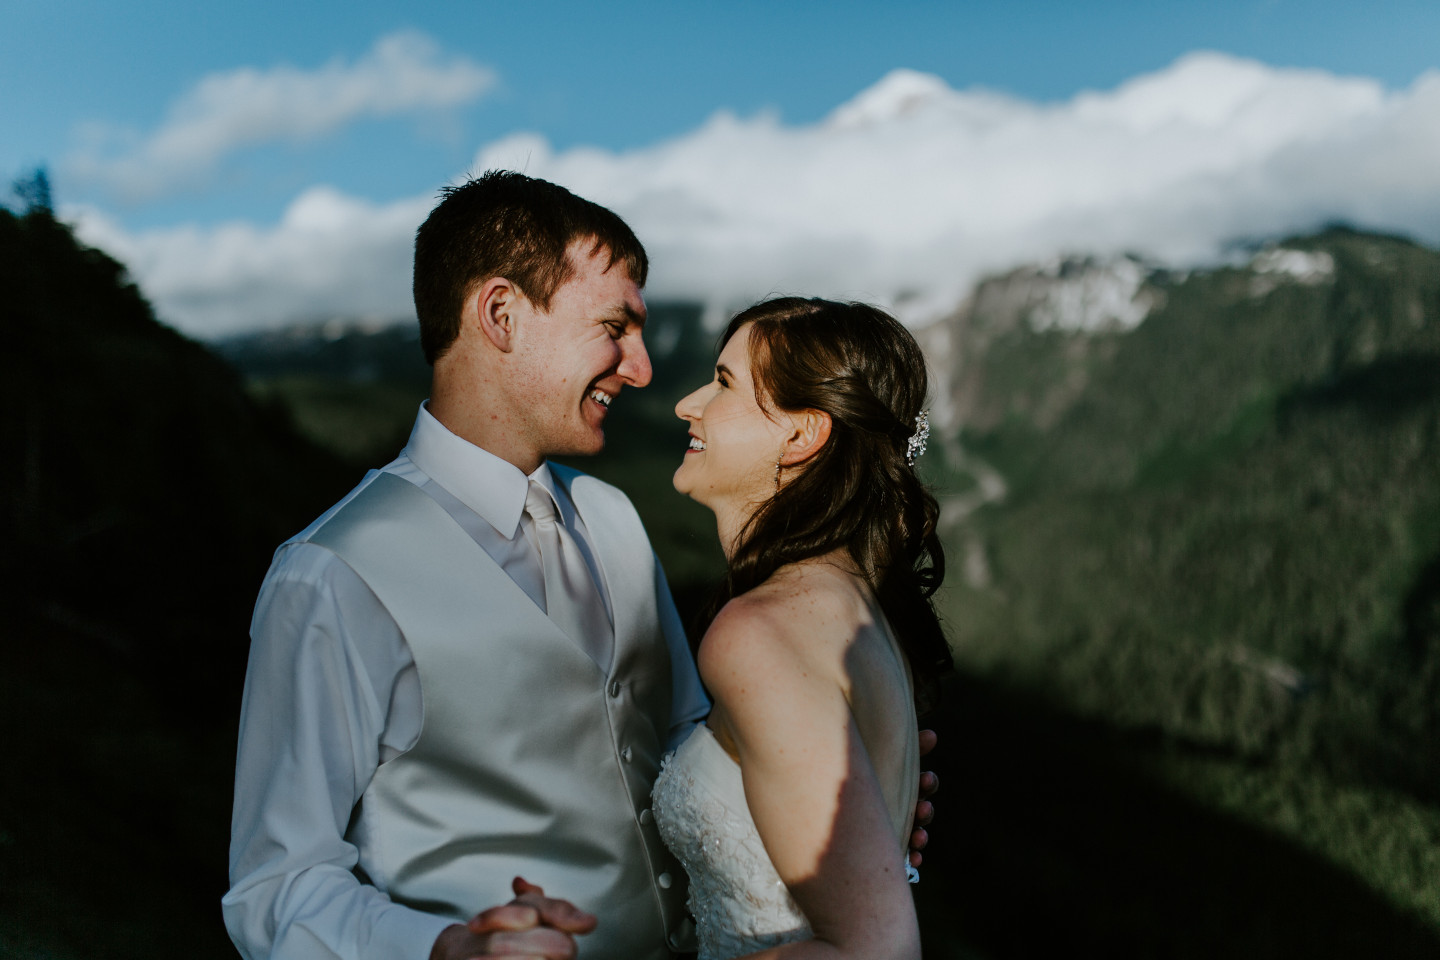 Moira and Ryans smile at each other near at Mount Hood. Adventure elopement wedding shoot by Sienna Plus Josh.